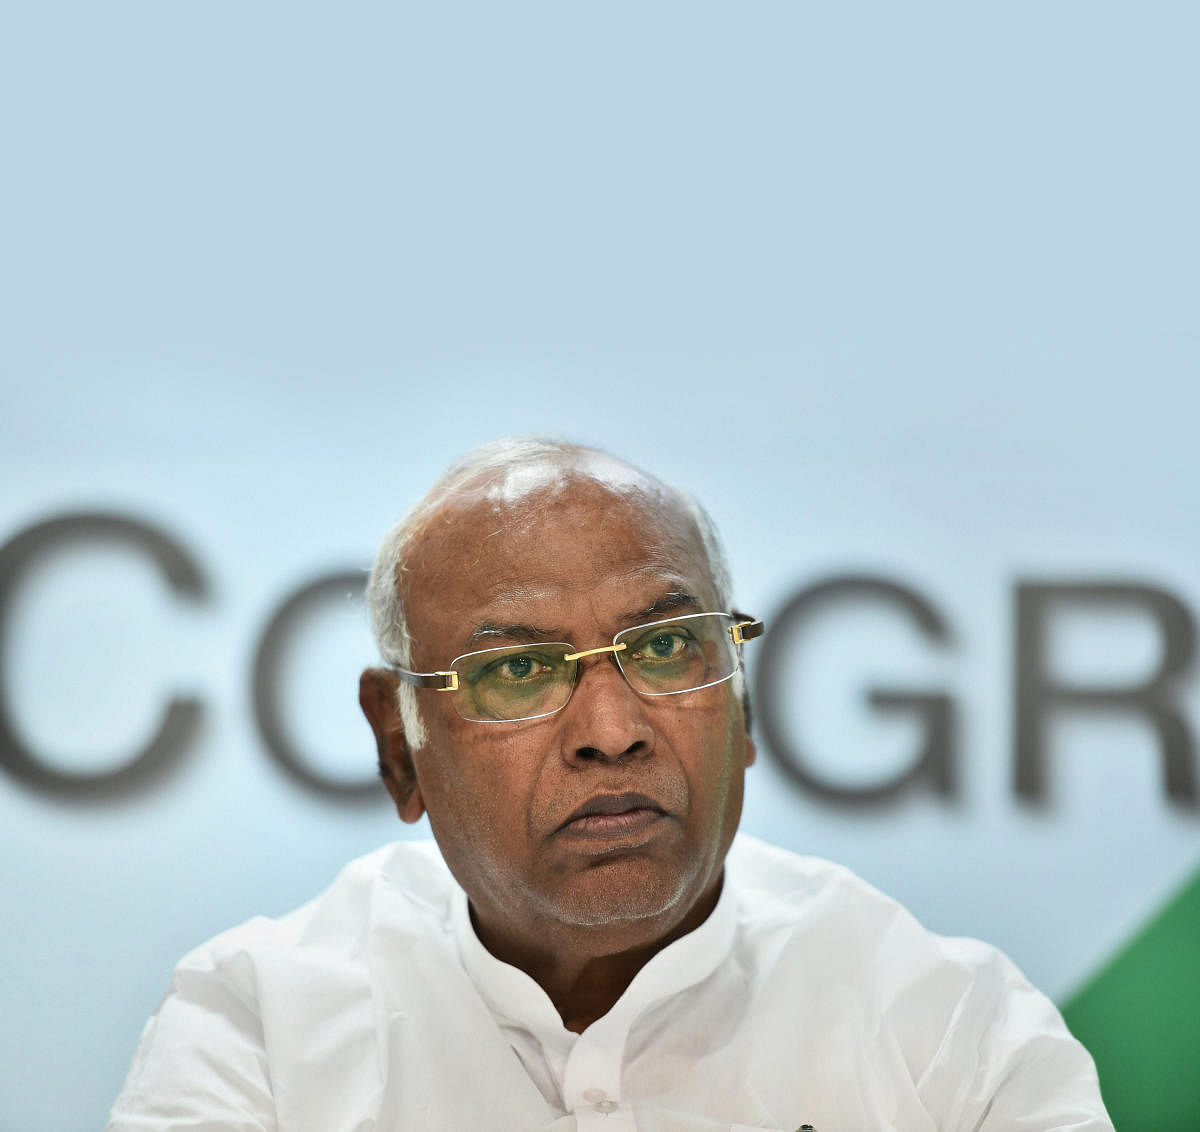 Kharge, who lost the recent Lok Sabha election from Gulbarga parliamentary seat, said the BJP had been trying to poach rival party MLAs in 14 different States, including Karnataka.